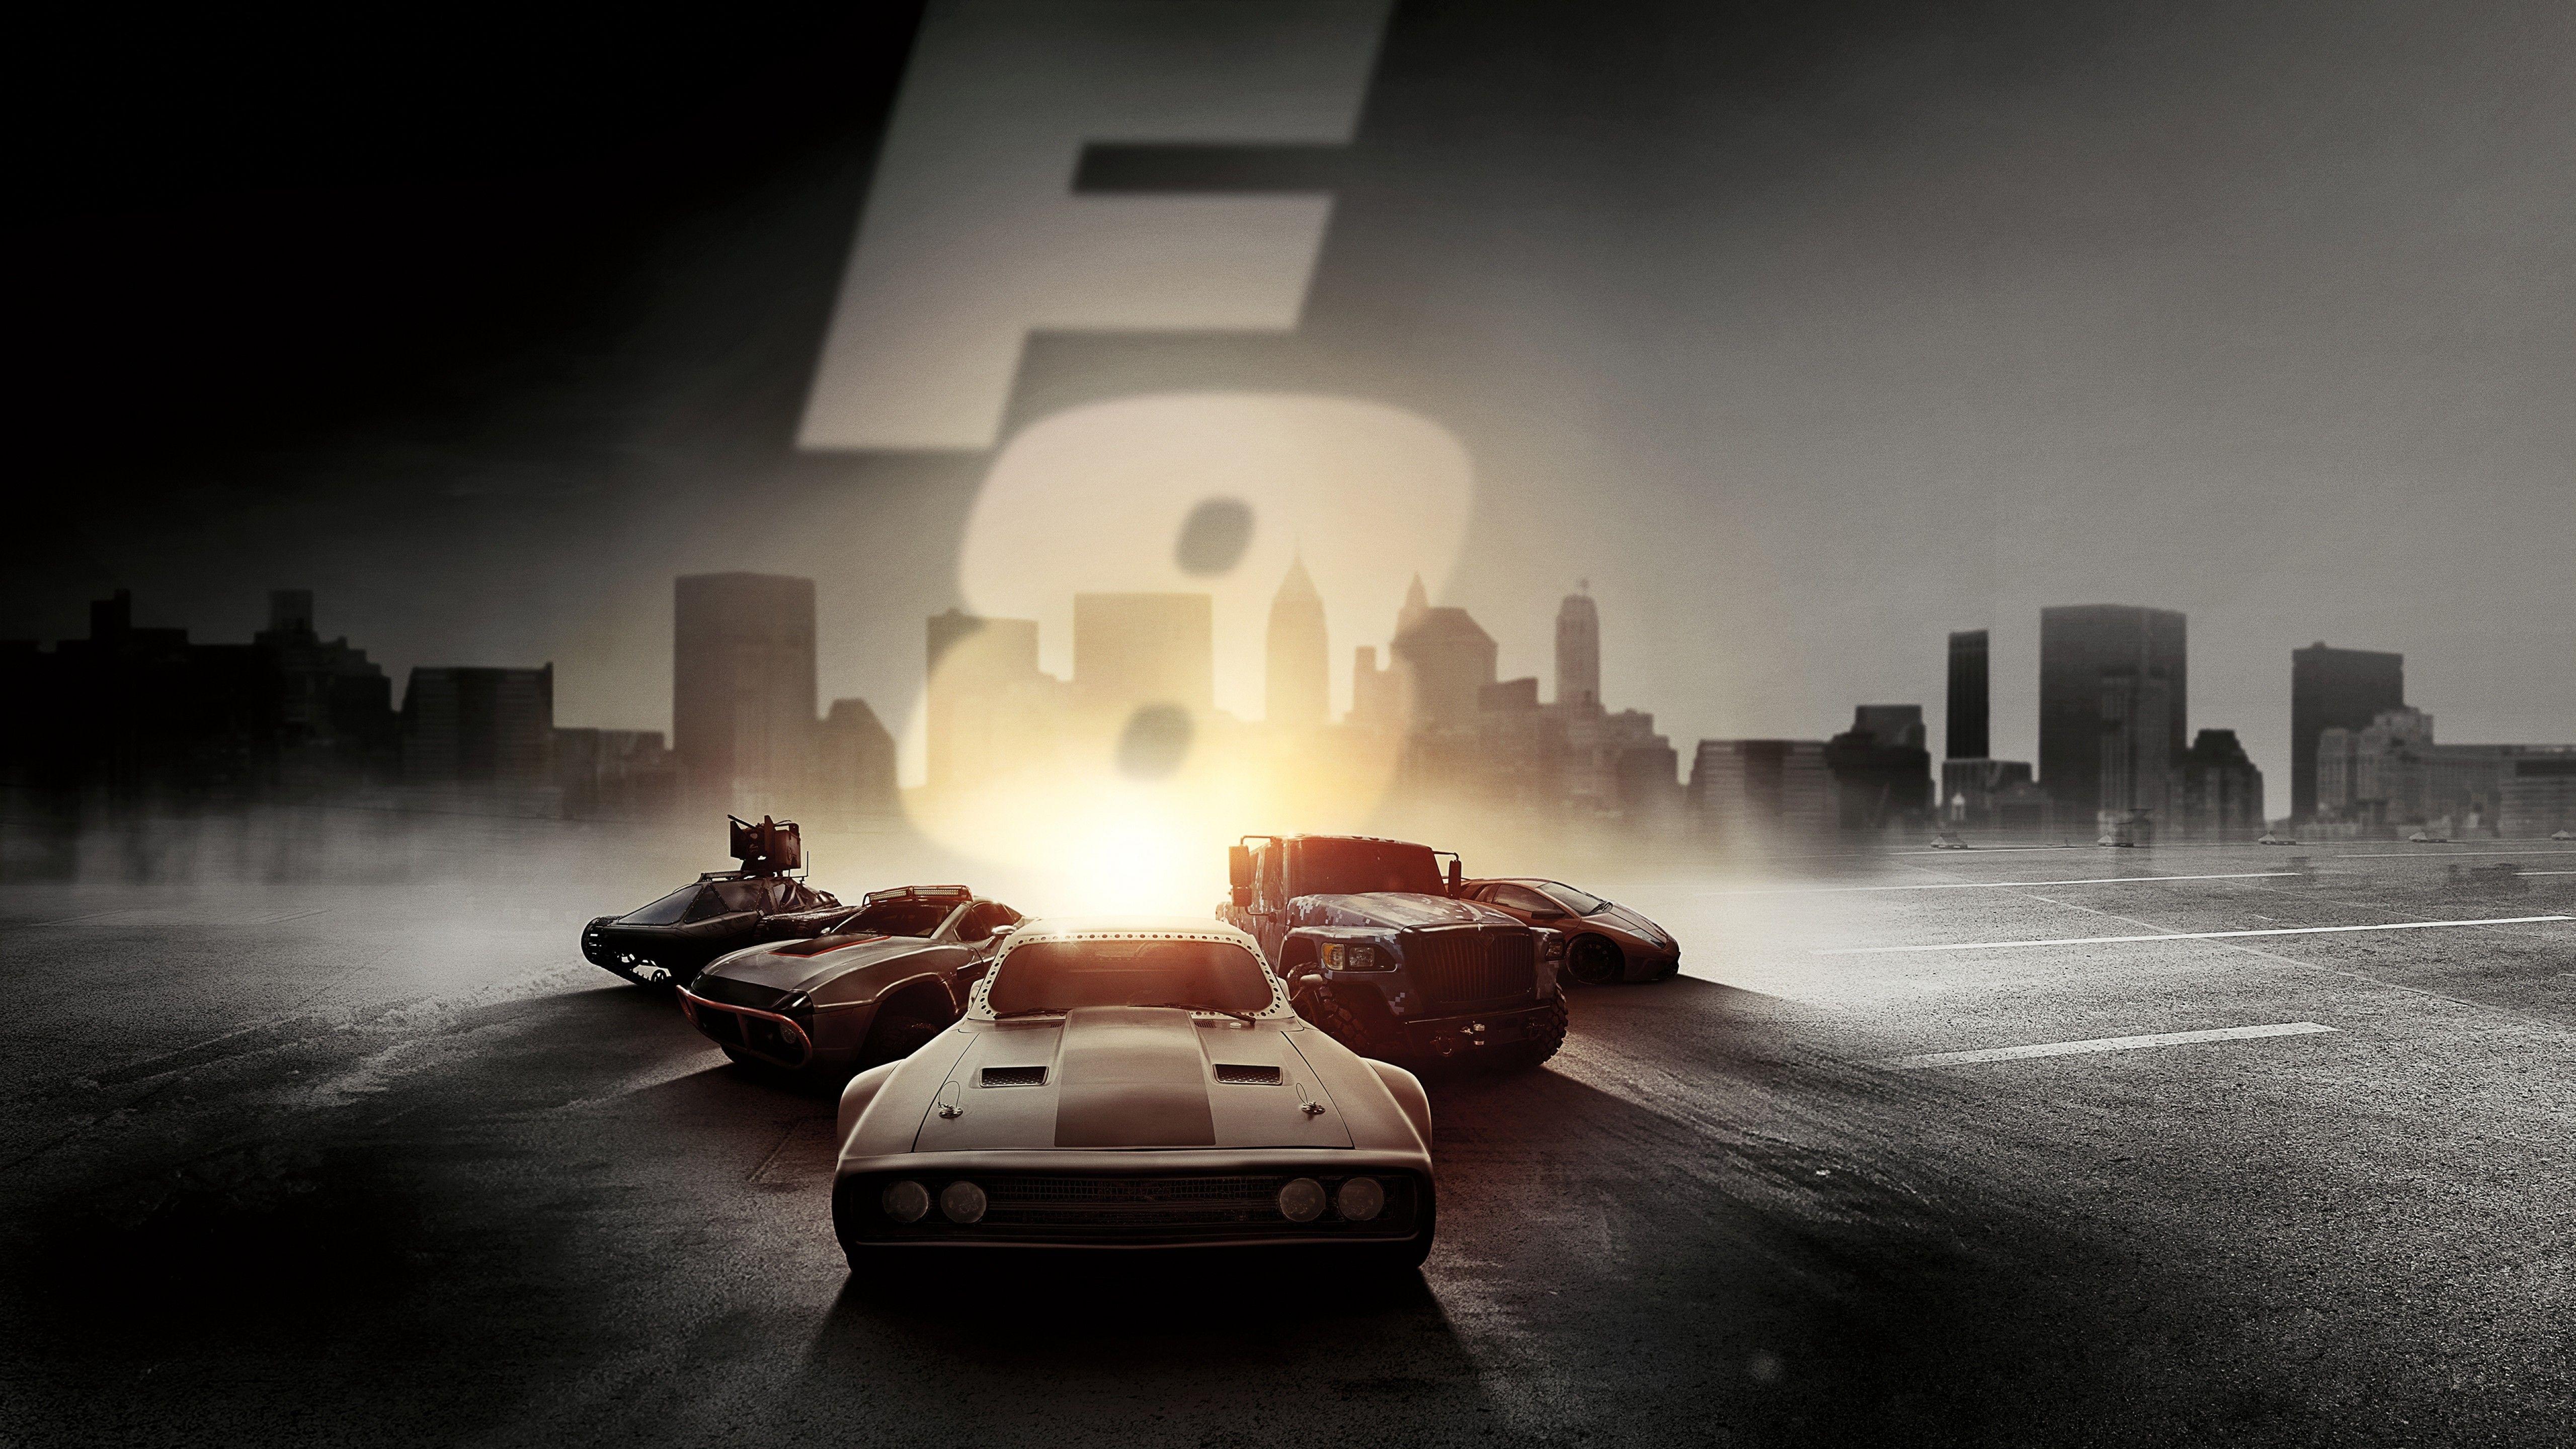 for mac download The Fate of the Furious